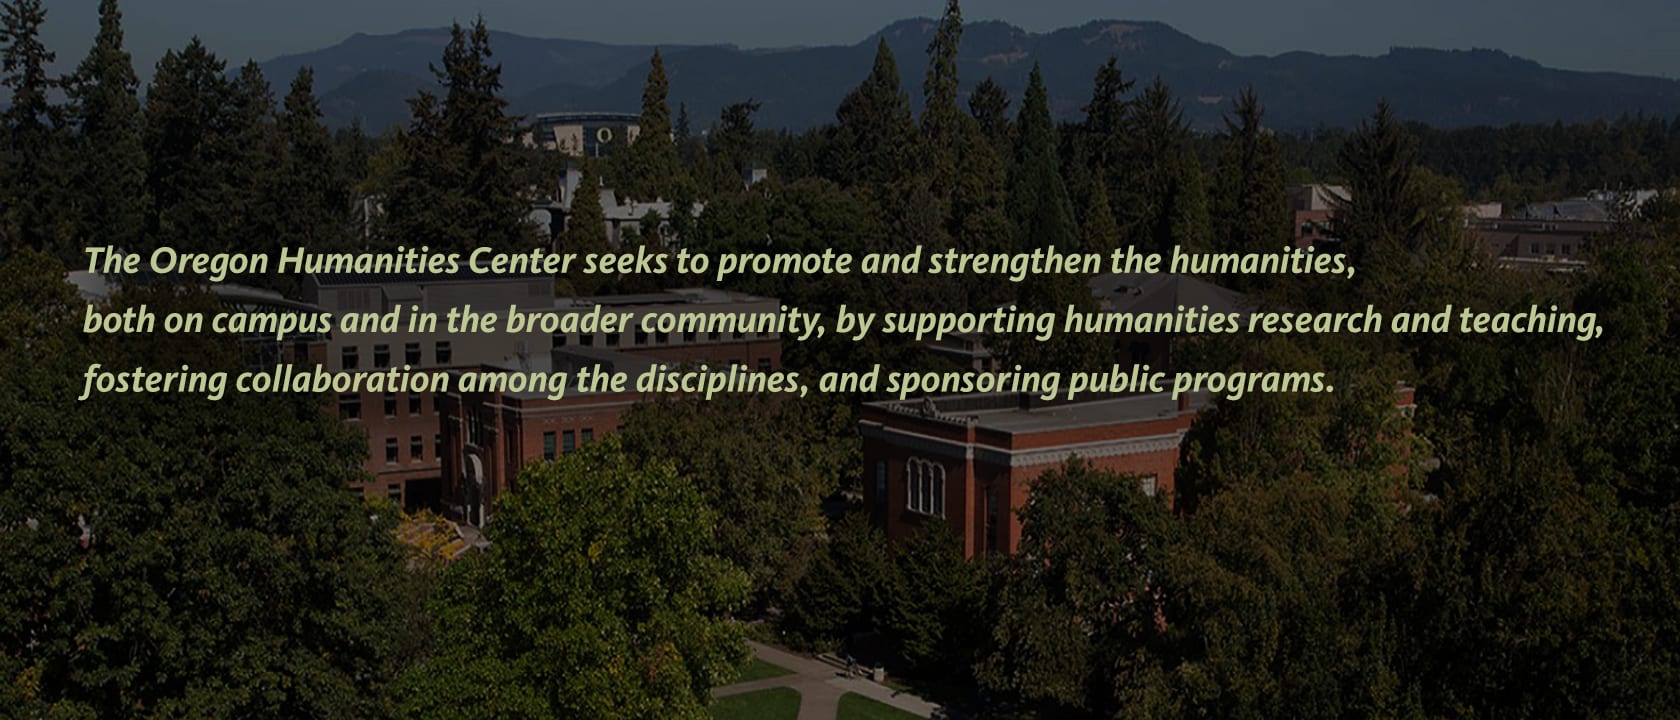 The Oregon Humanities Center seeks to promote and strengthen the humanities, both on campus and in the broader community, by supporting humanities research and teaching, fostering collaboration among the disciplines, and sponsoring public programs.